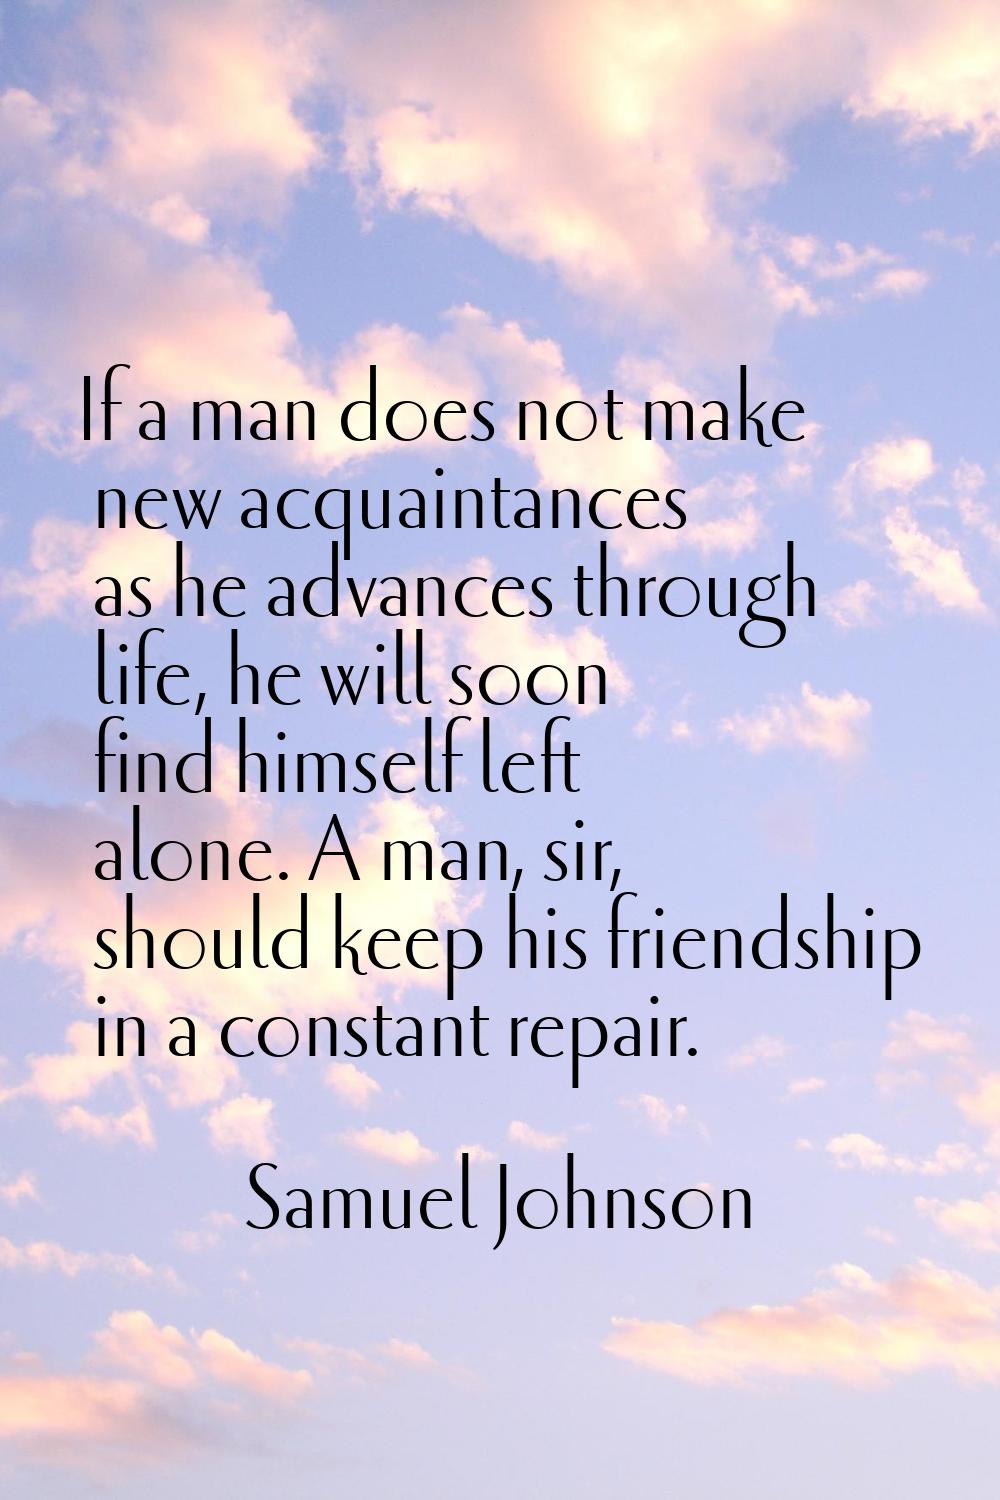 If a man does not make new acquaintances as he advances through life, he will soon find himself lef